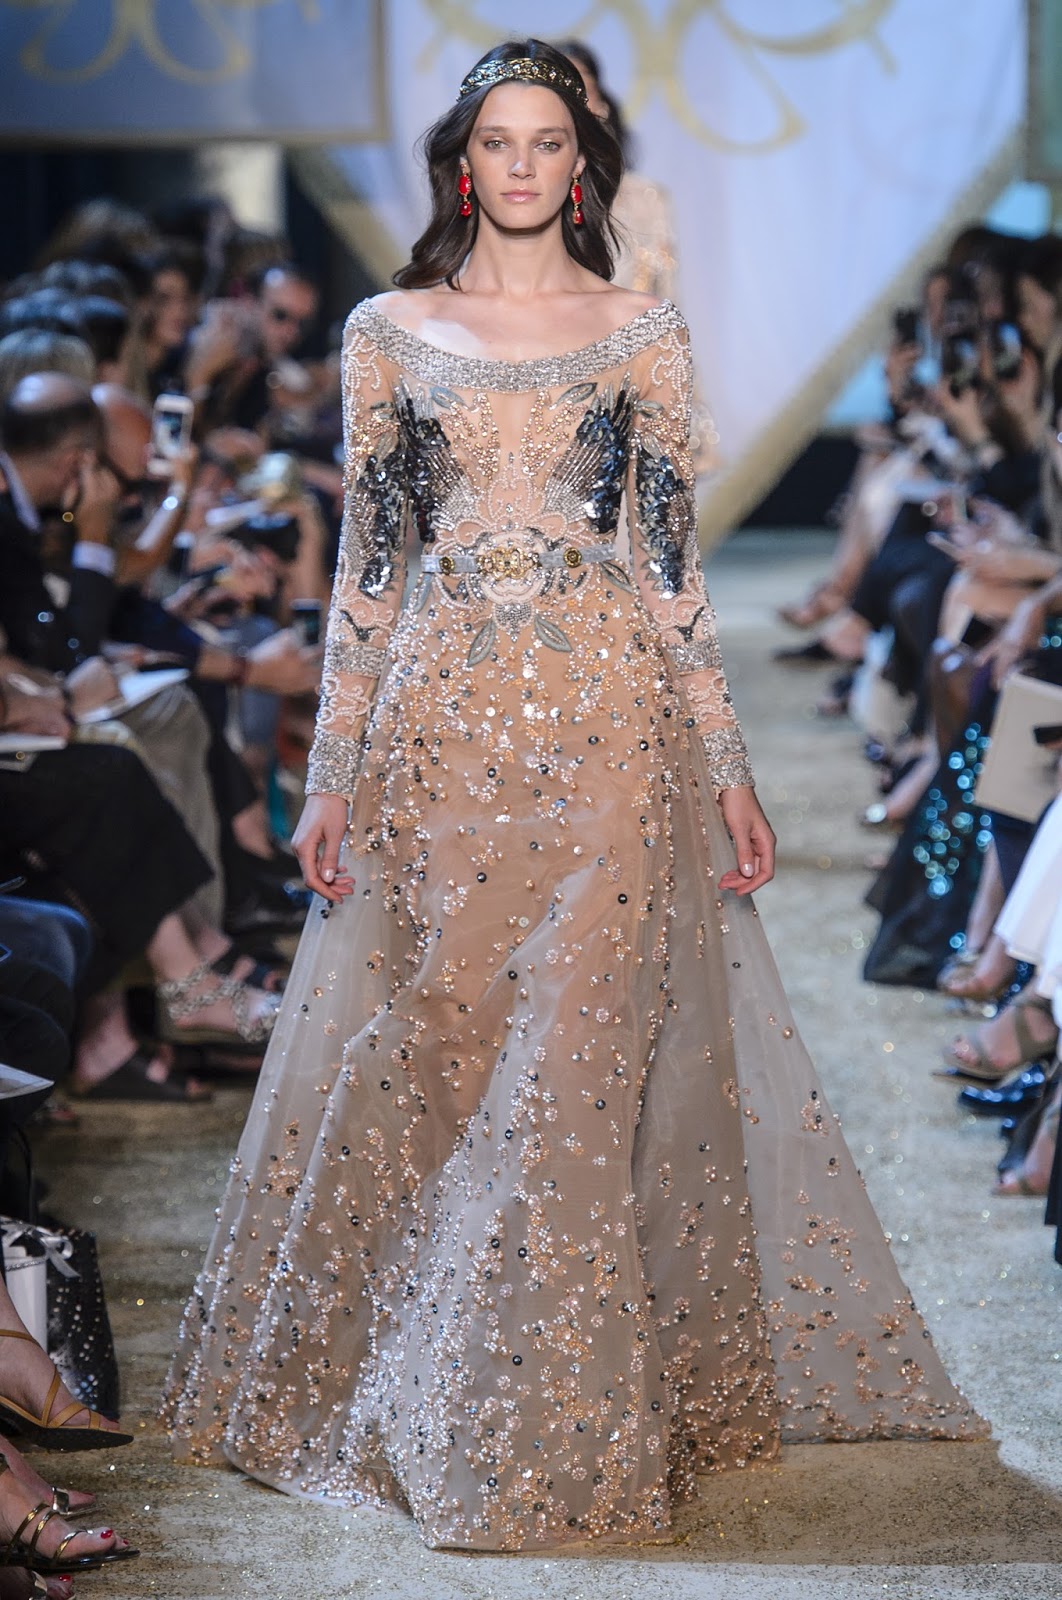 Gorgeous by ELIE SAAB July 30, 2017 | ZsaZsa Bellagio - Like No Other